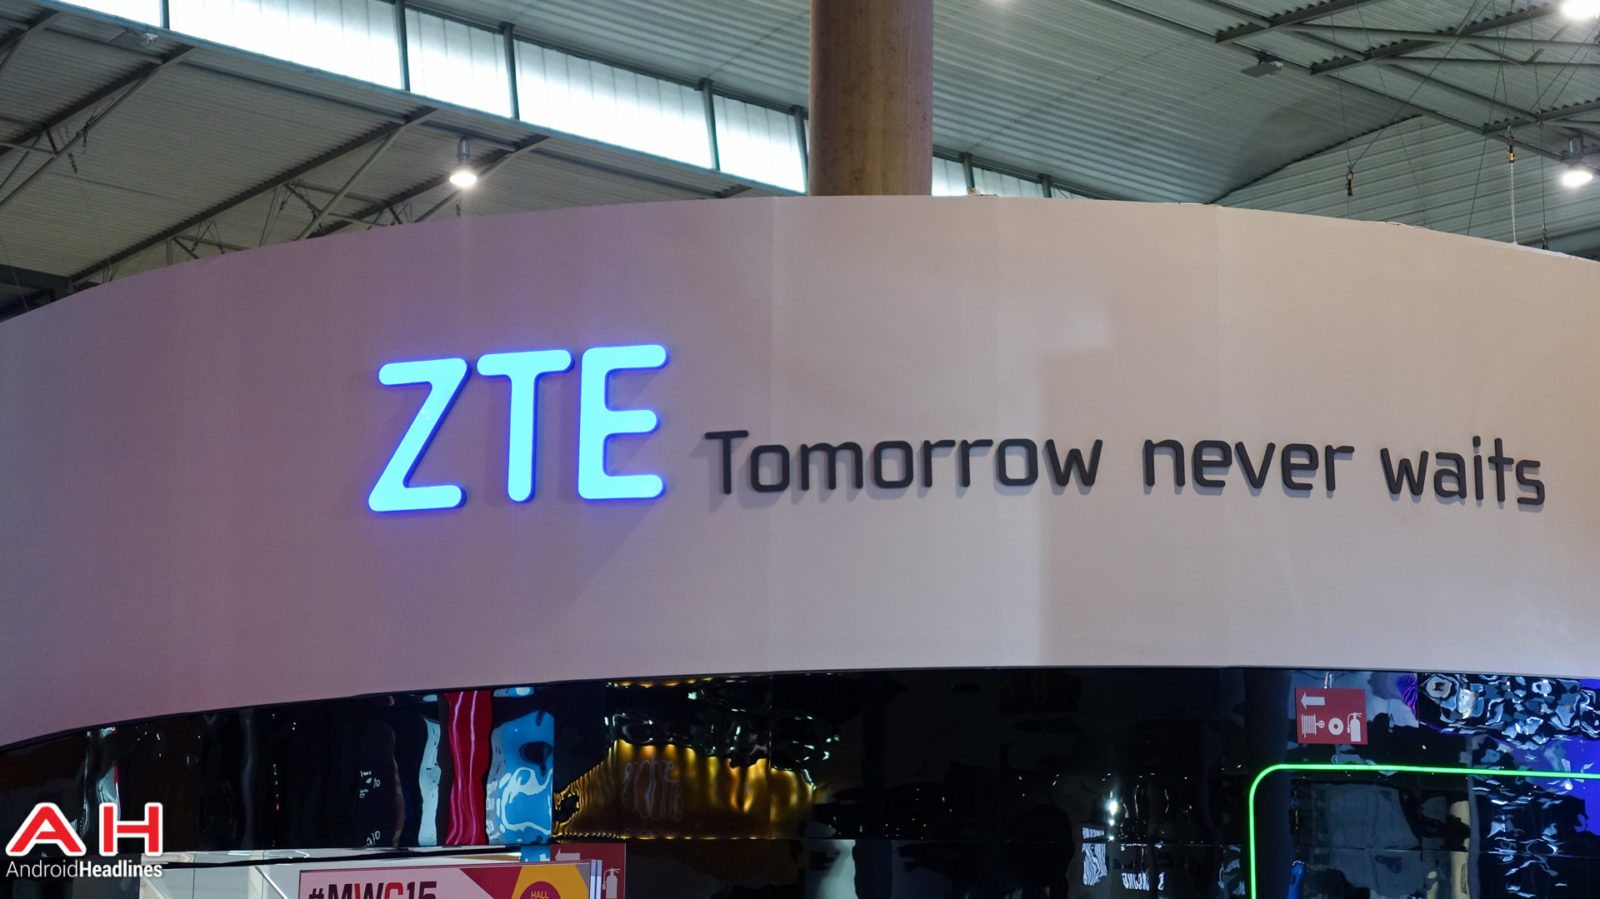 China's ZTE Fires Back at U.S., Calls 7-Year Ban ‘Unacceptable'